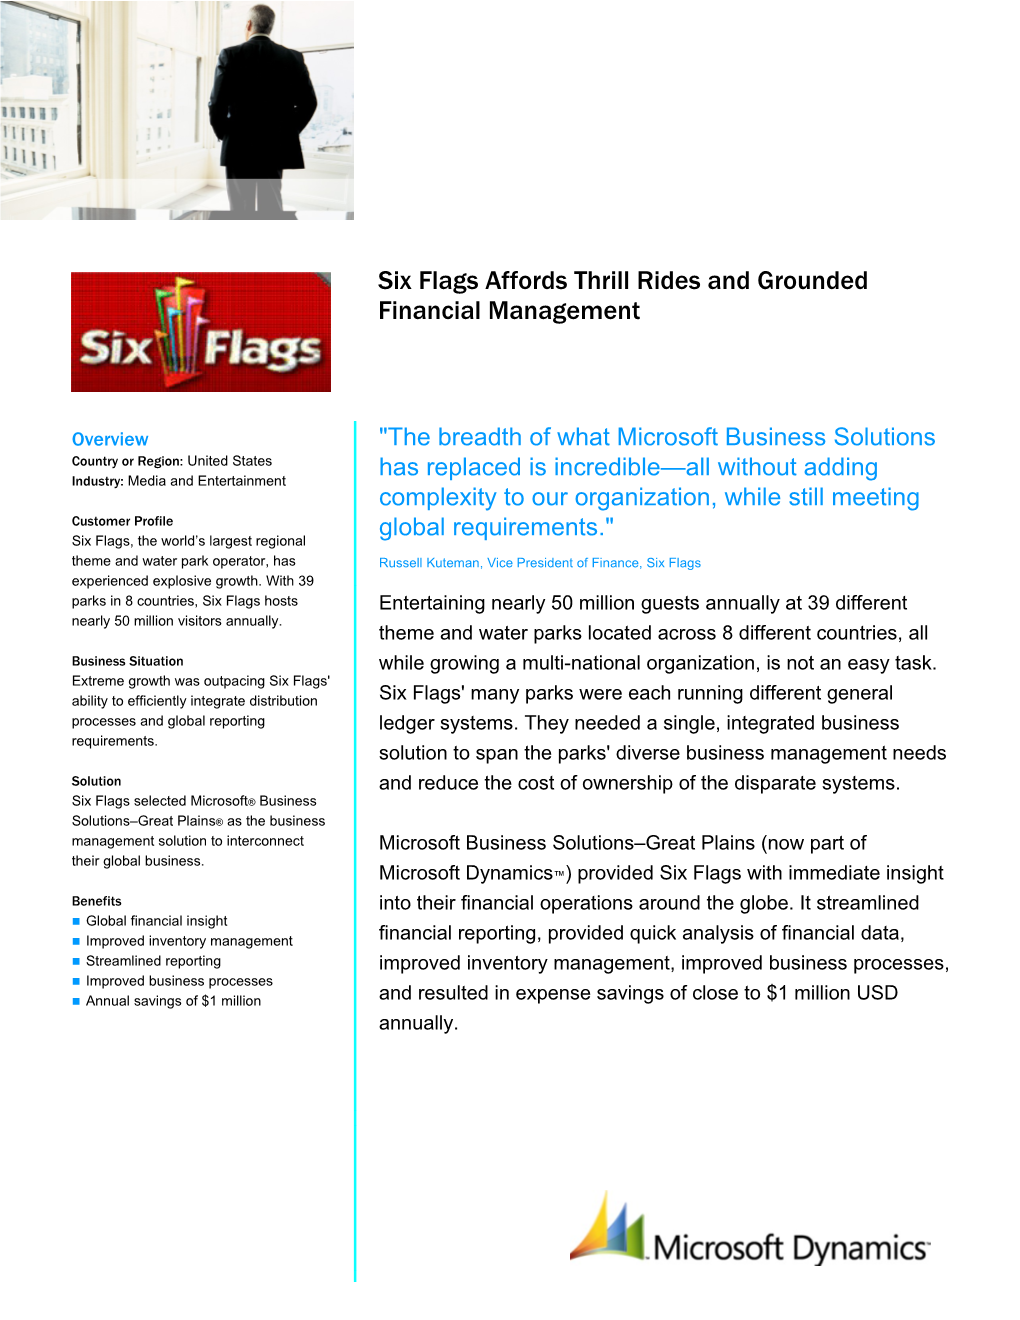 Six Flags Affords Thrill Rides and Grounded Financial Management